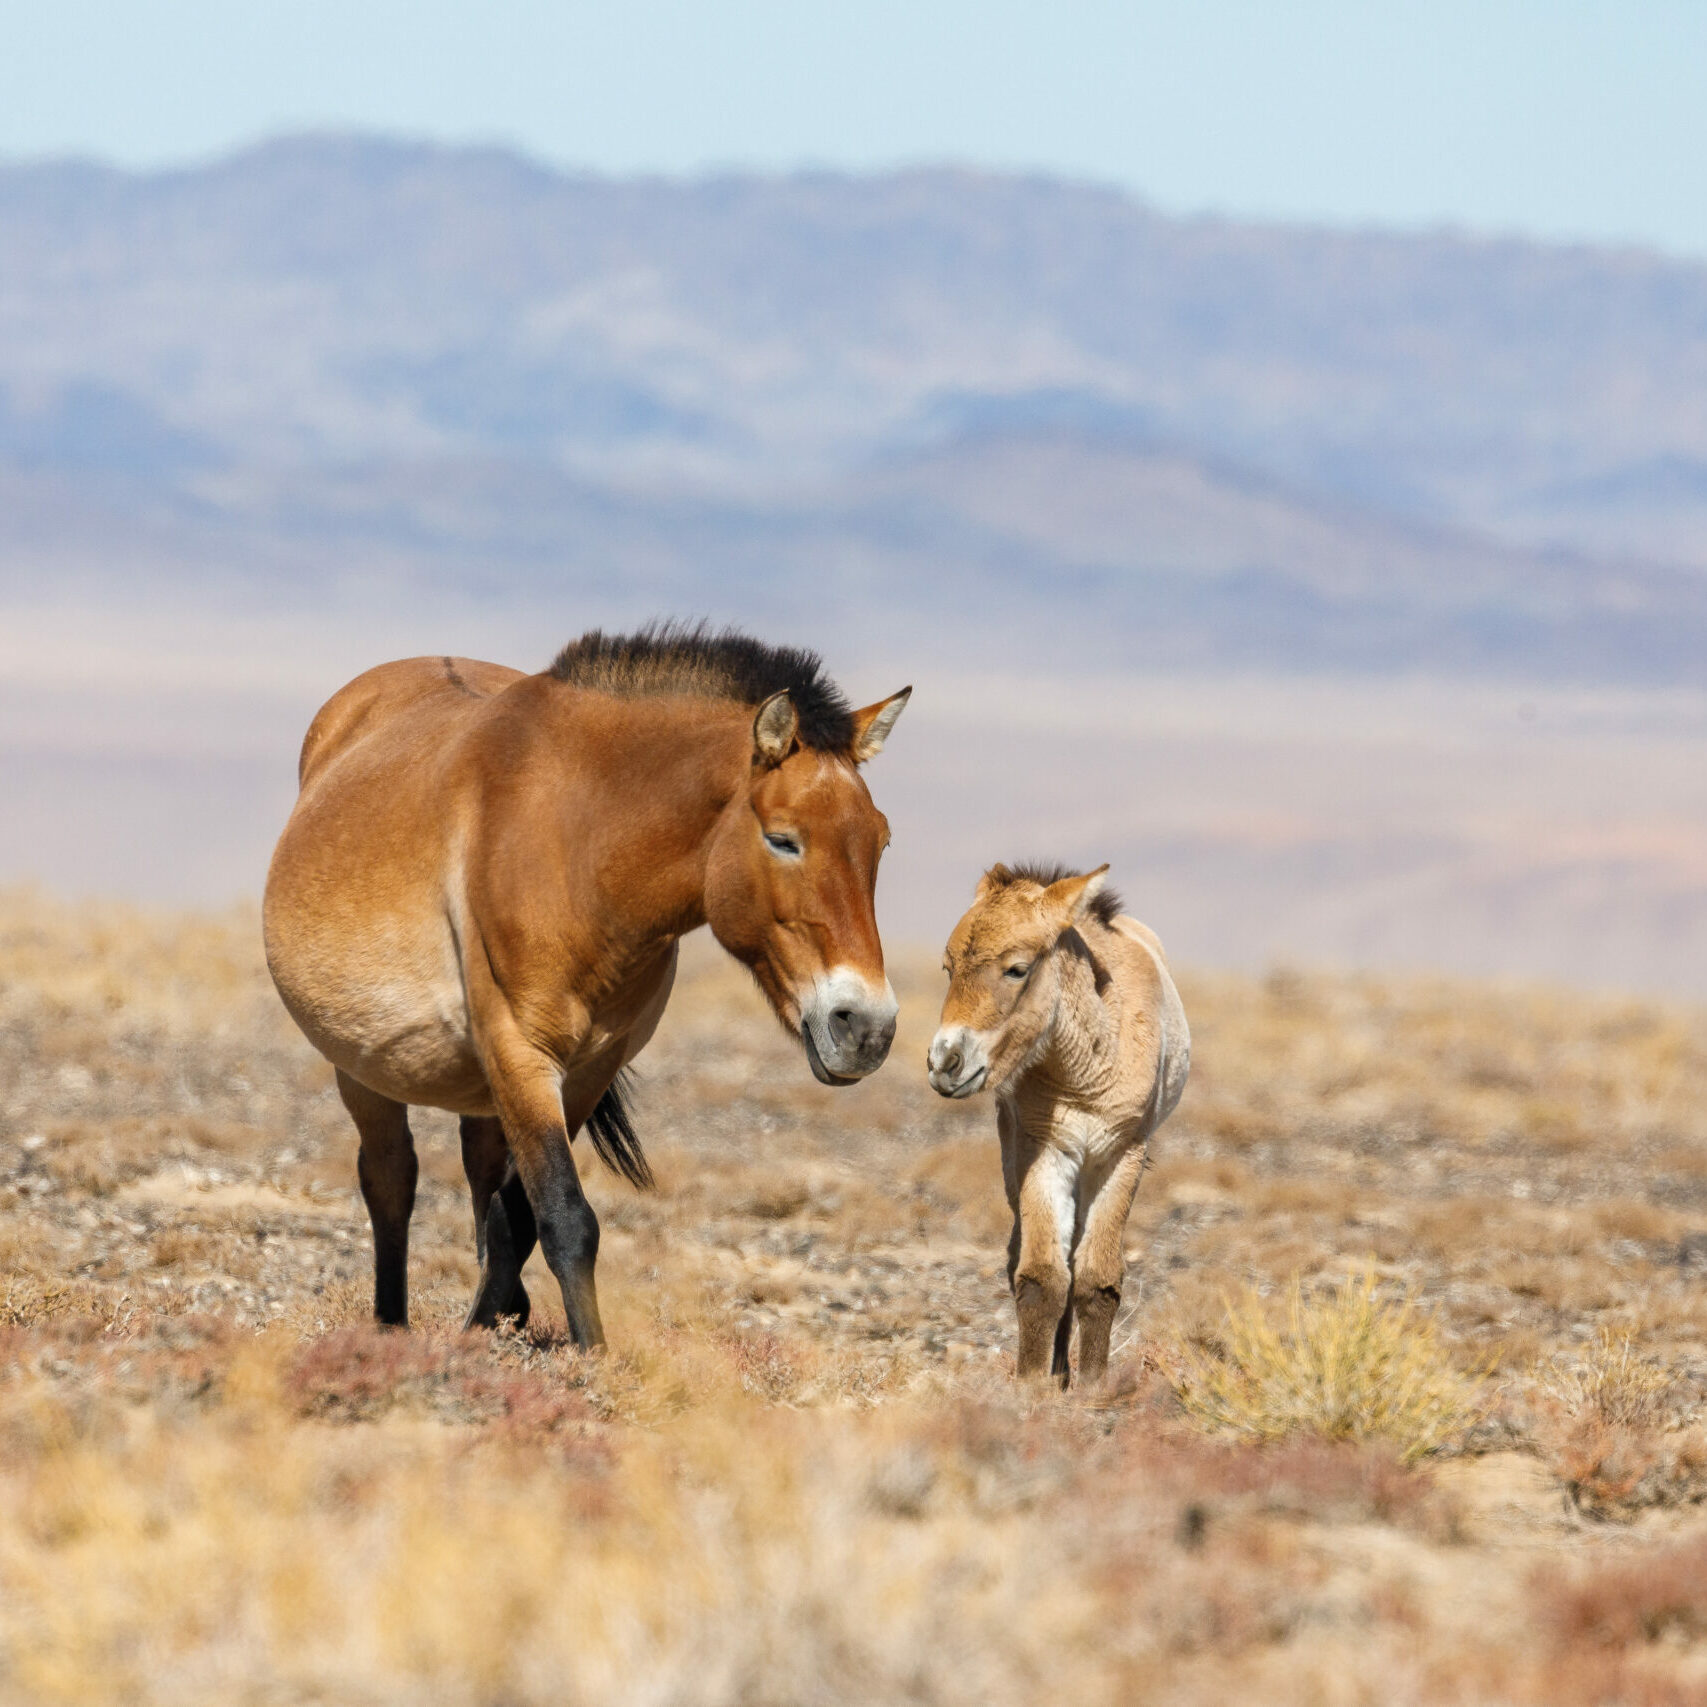 Przewalski's horse mare and foal on an arid landscape with mountains in the background